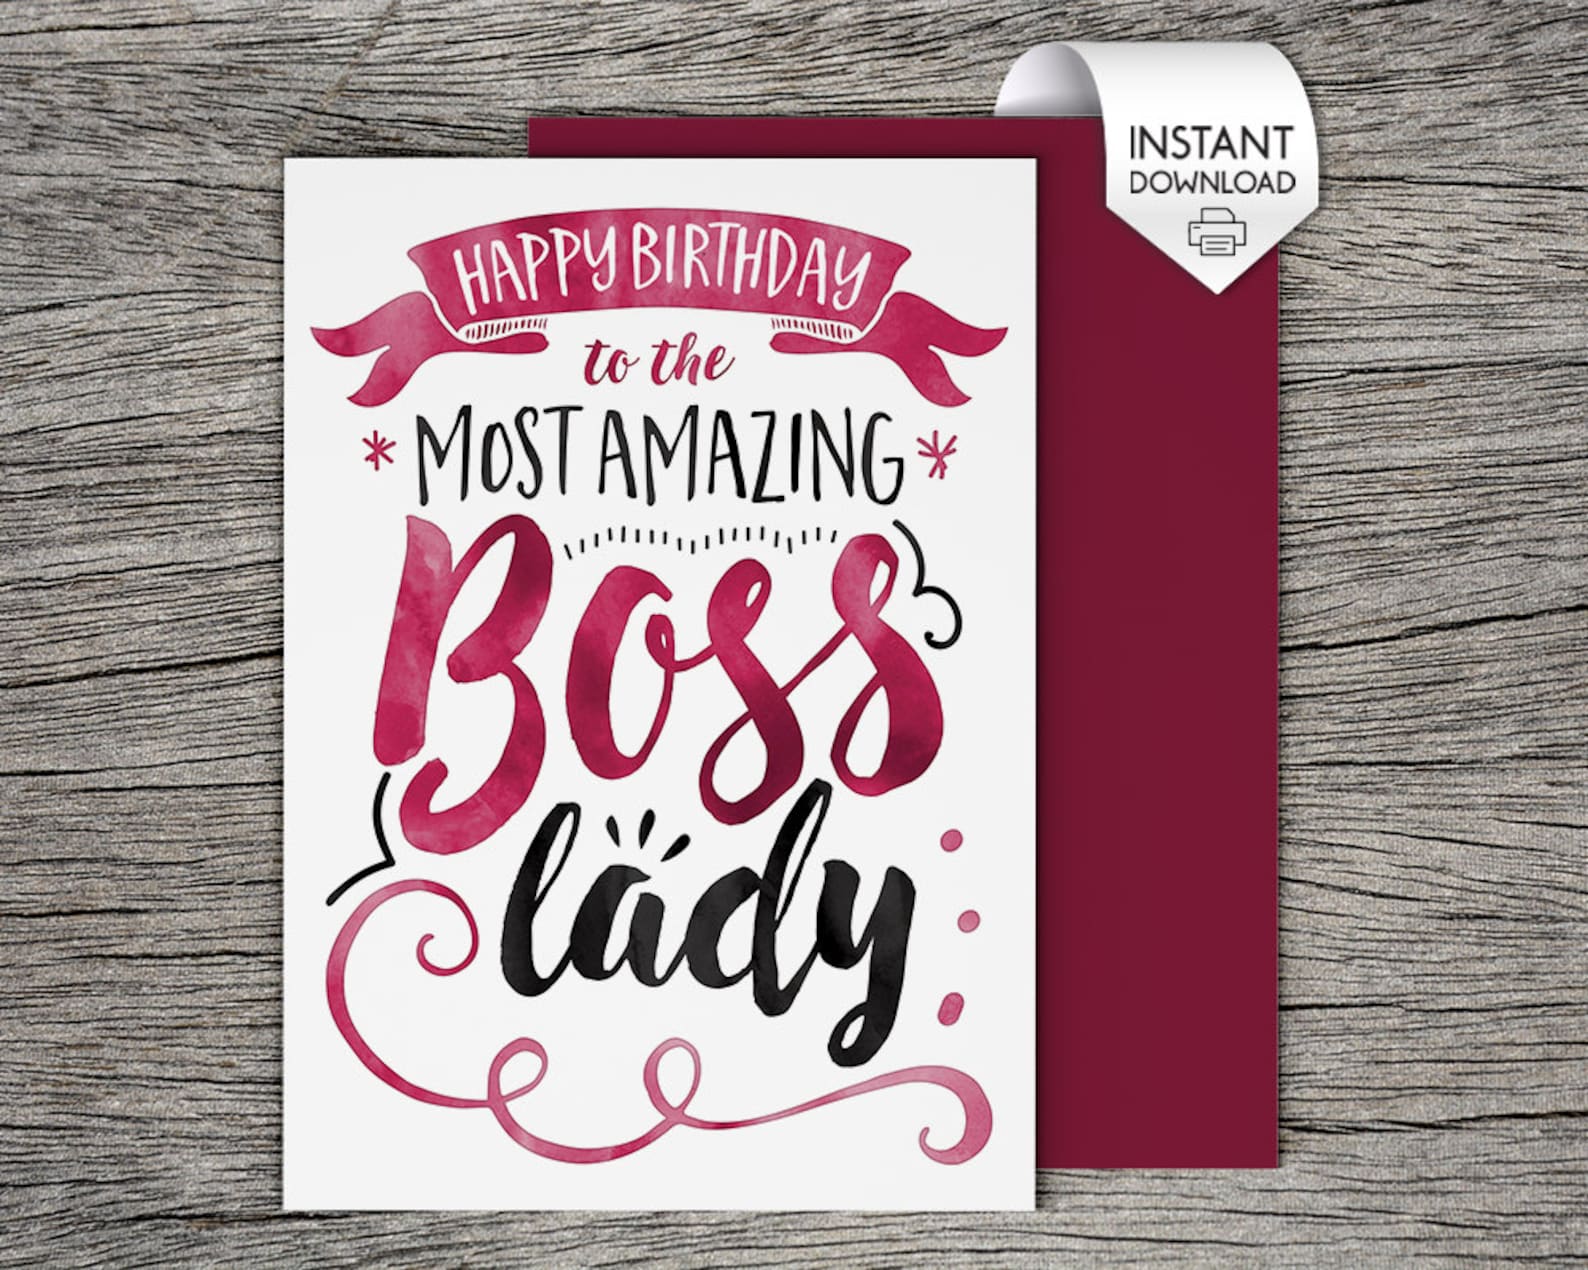 printable-card-happy-birthday-to-the-most-amazing-boss-lady-etsy